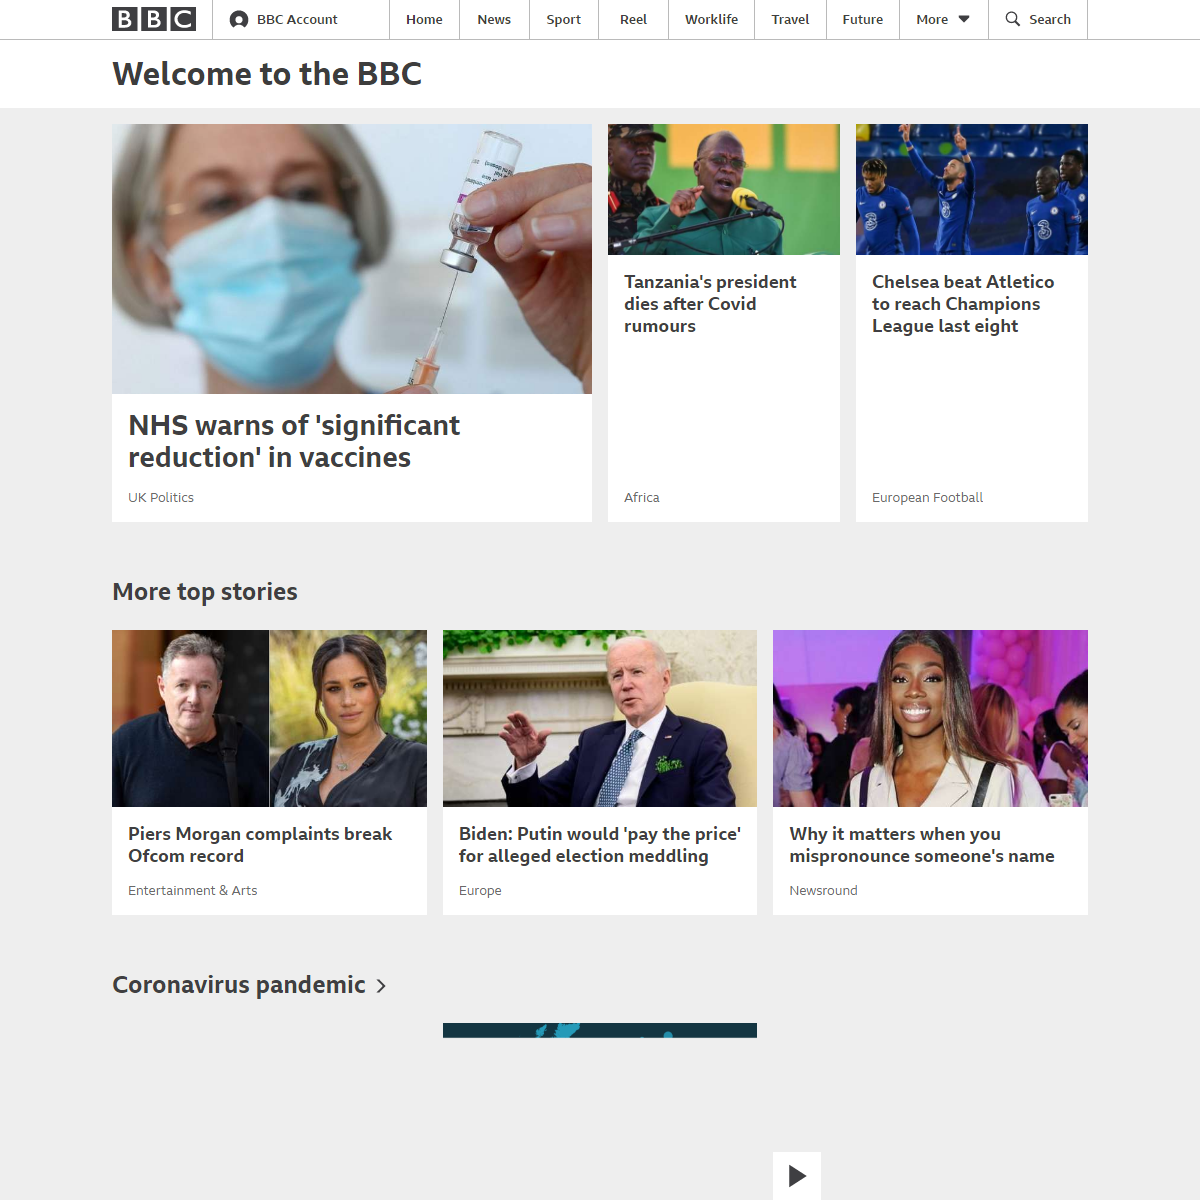 A complete backup of http://www.bbc.co.uk/